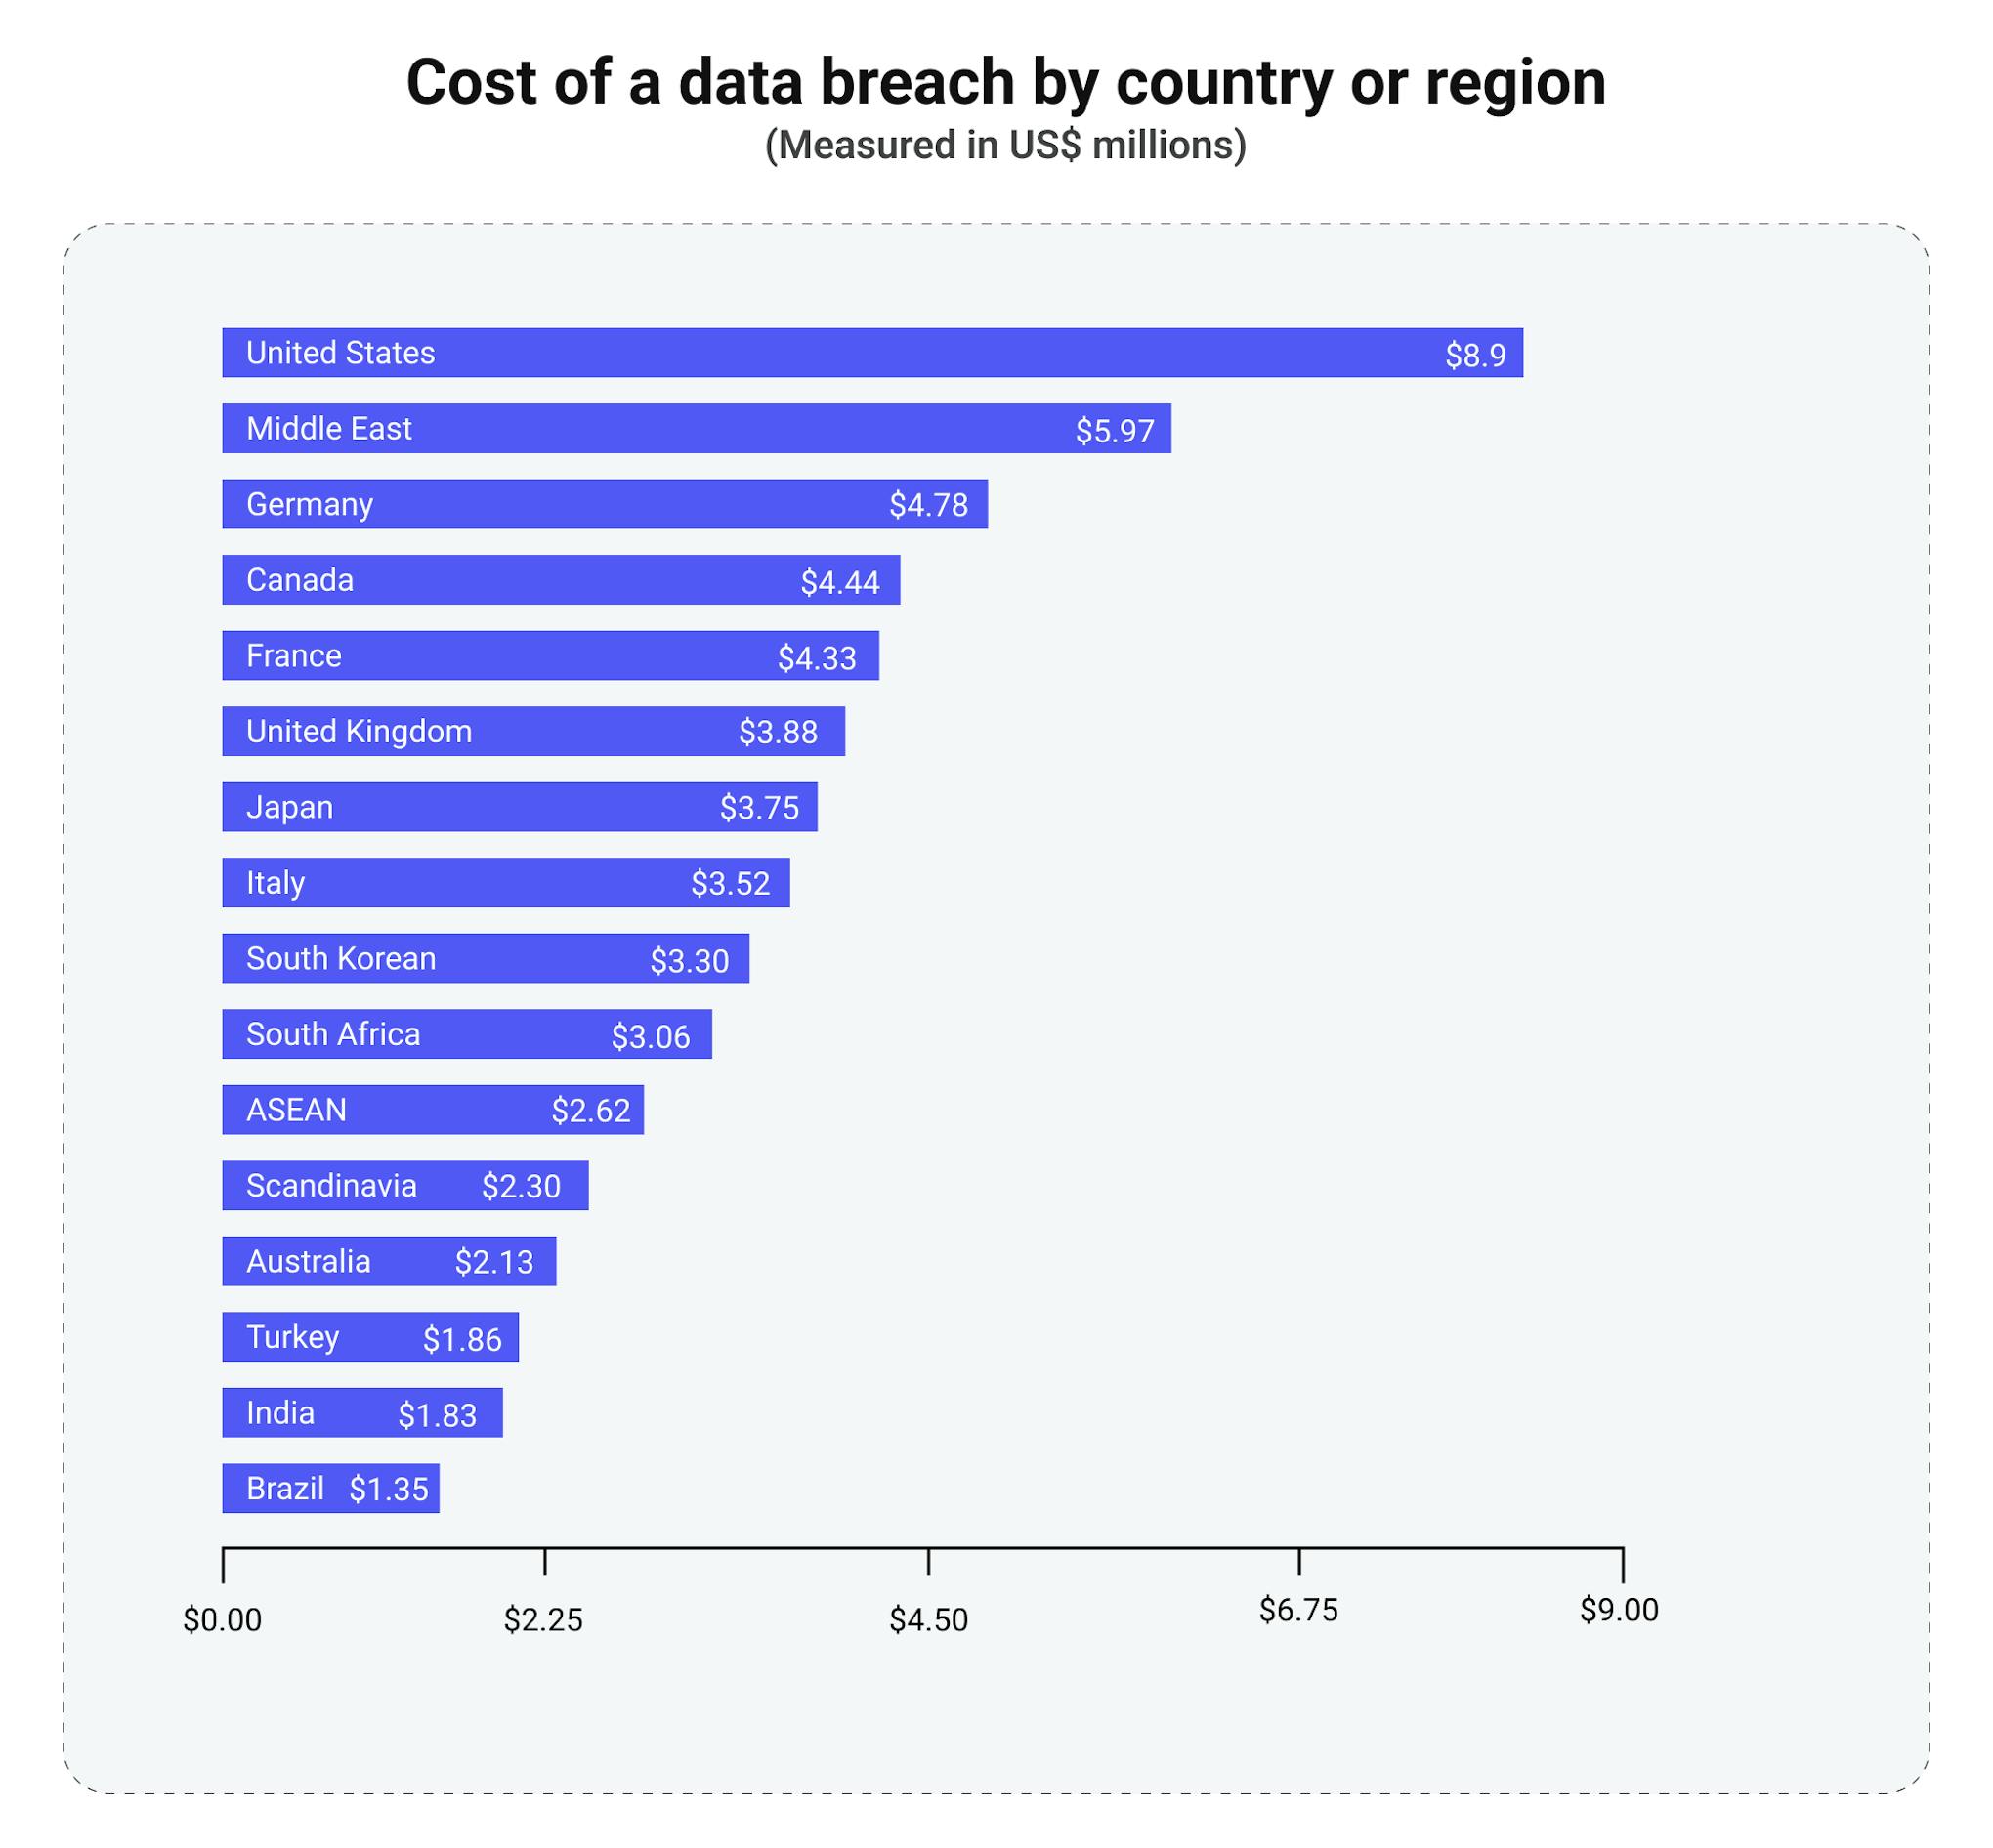 The average cost of data breaches is the highest in the USA